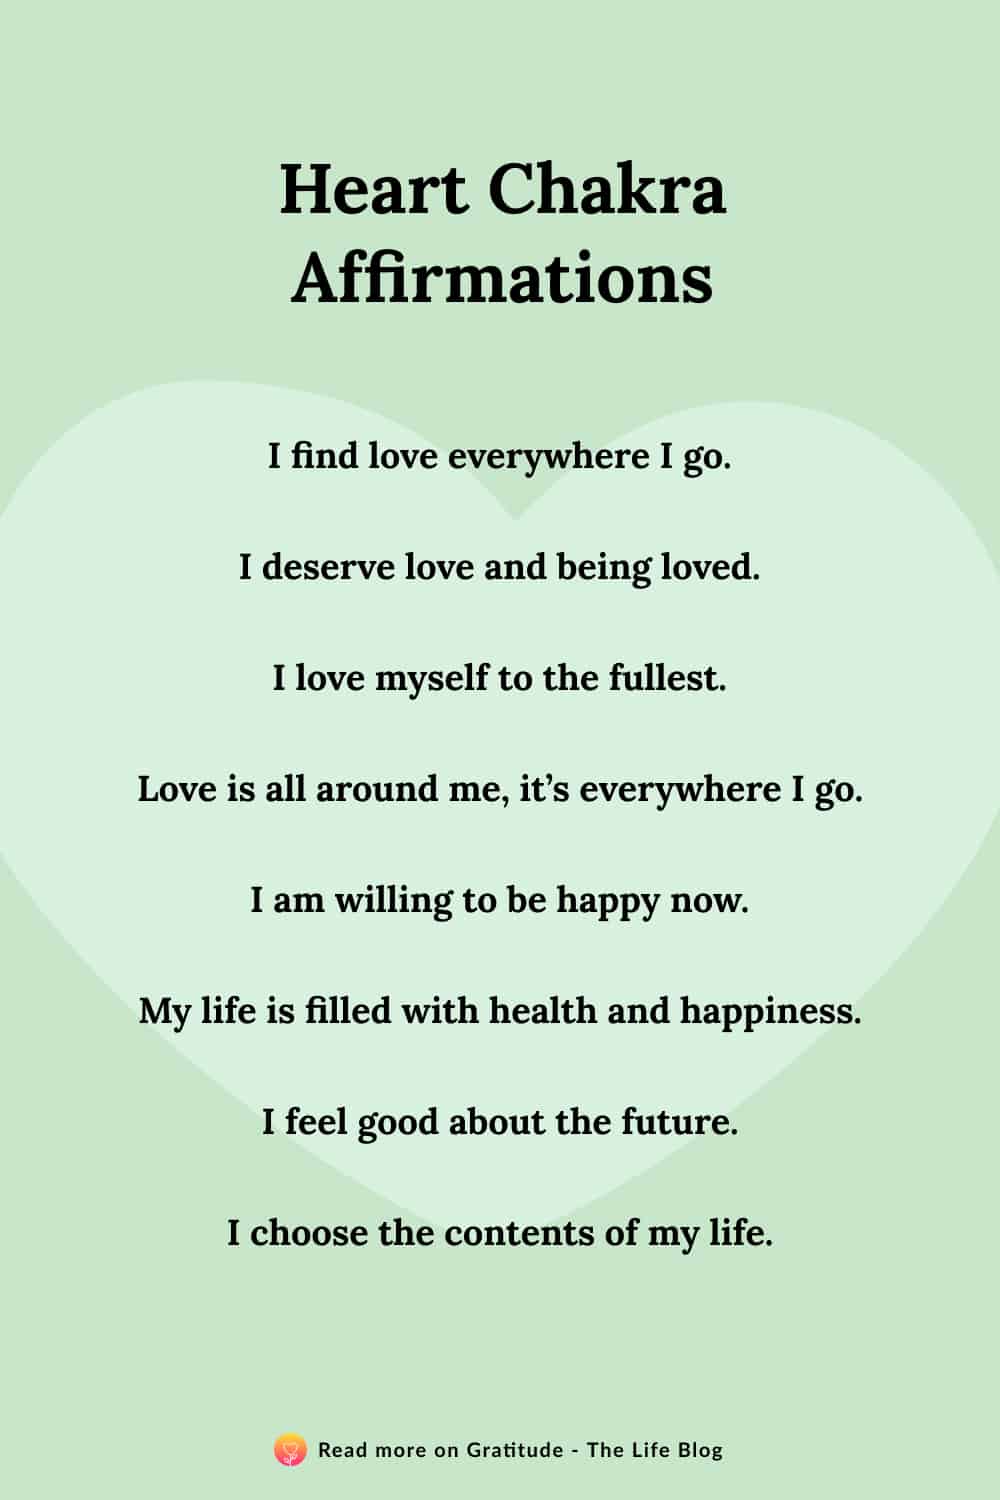 Image with list of heart chakra affirmations